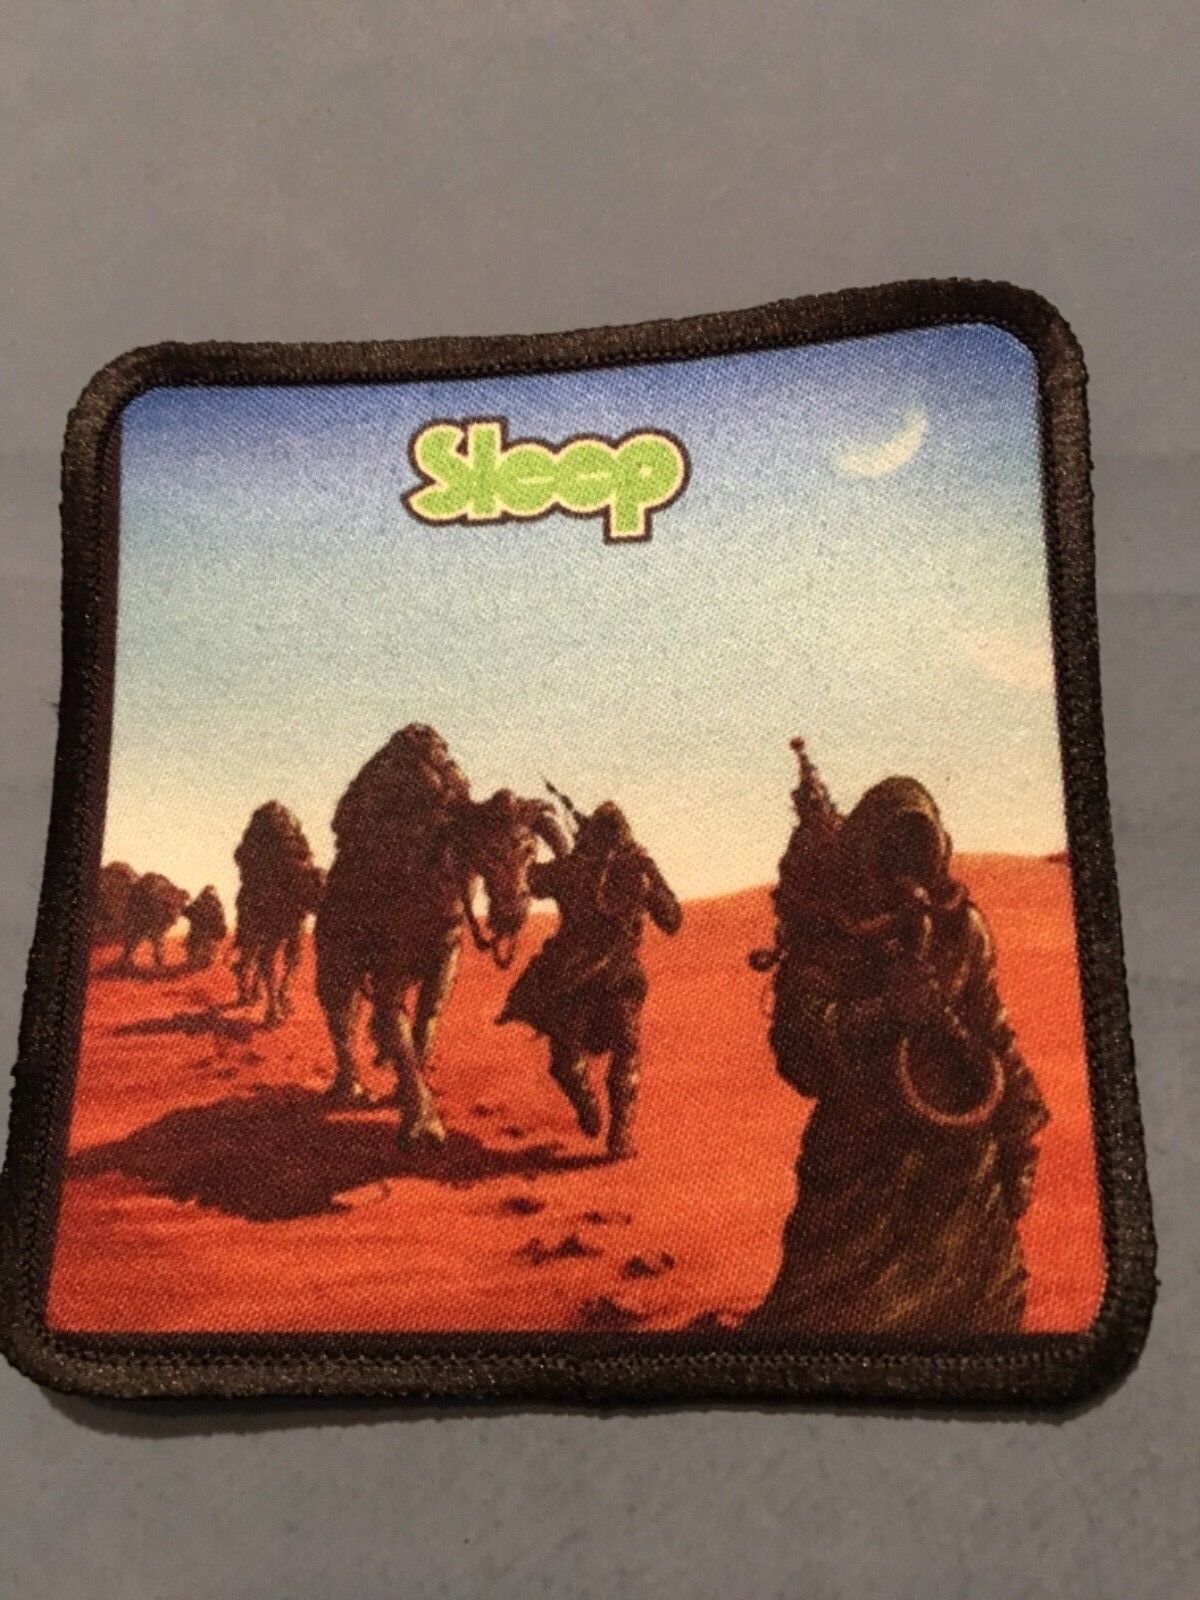 Sleep Dope Smoker Sublimated Patch 3”x3” Album Cover Rock Metal